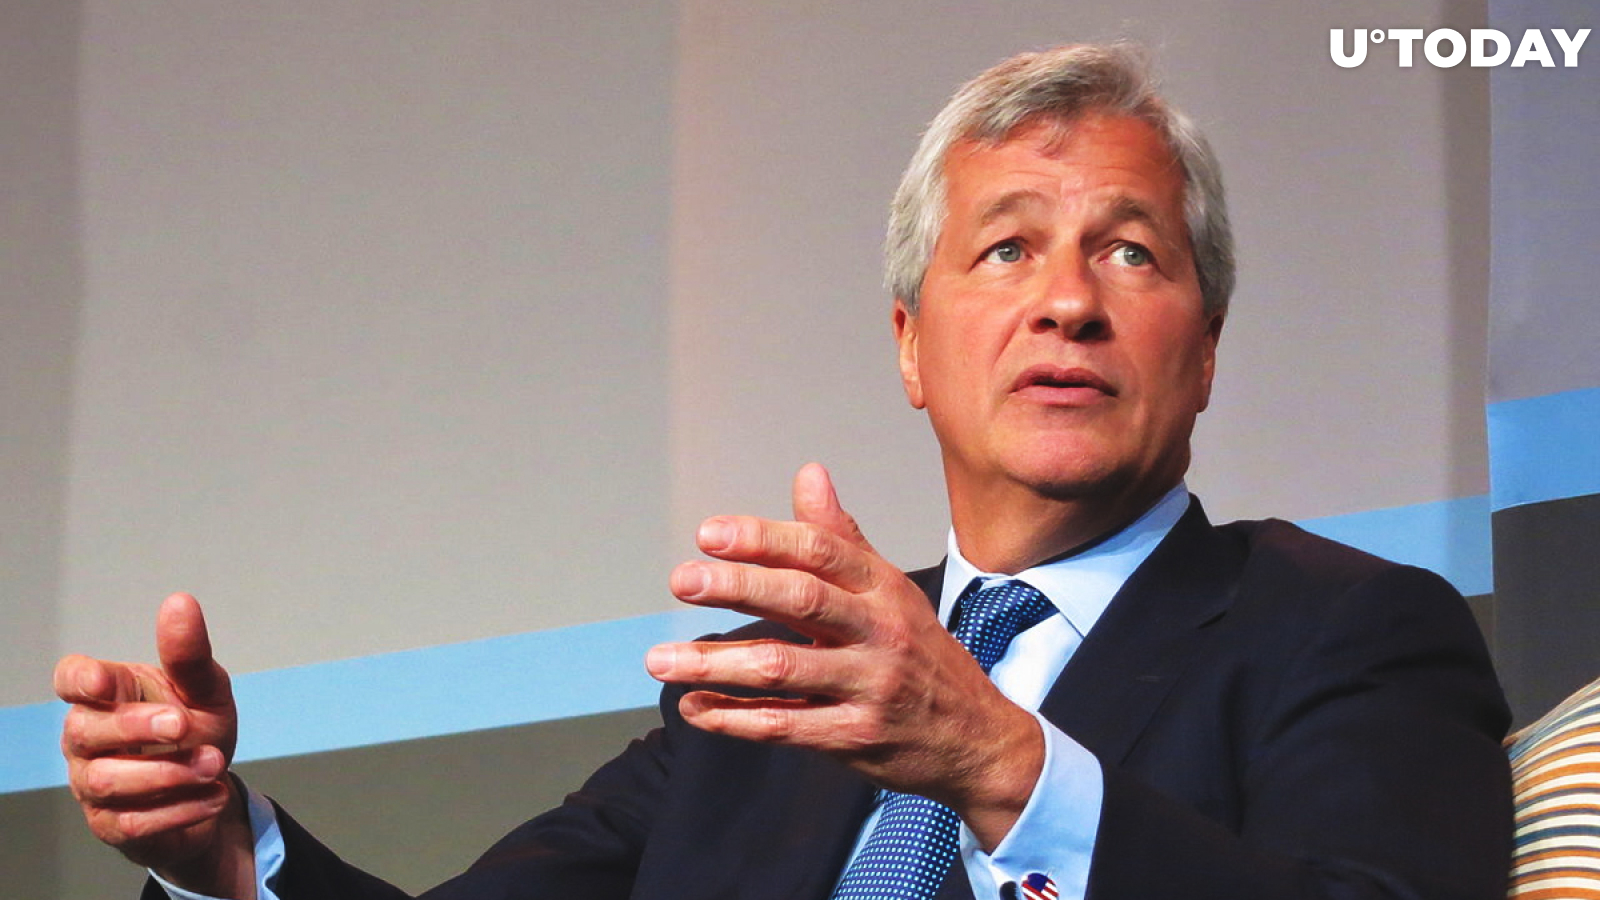 JPMorgan CEO Says Crypto Market Could Reach $5 Trillion, Urges Regulators to Pay Attention